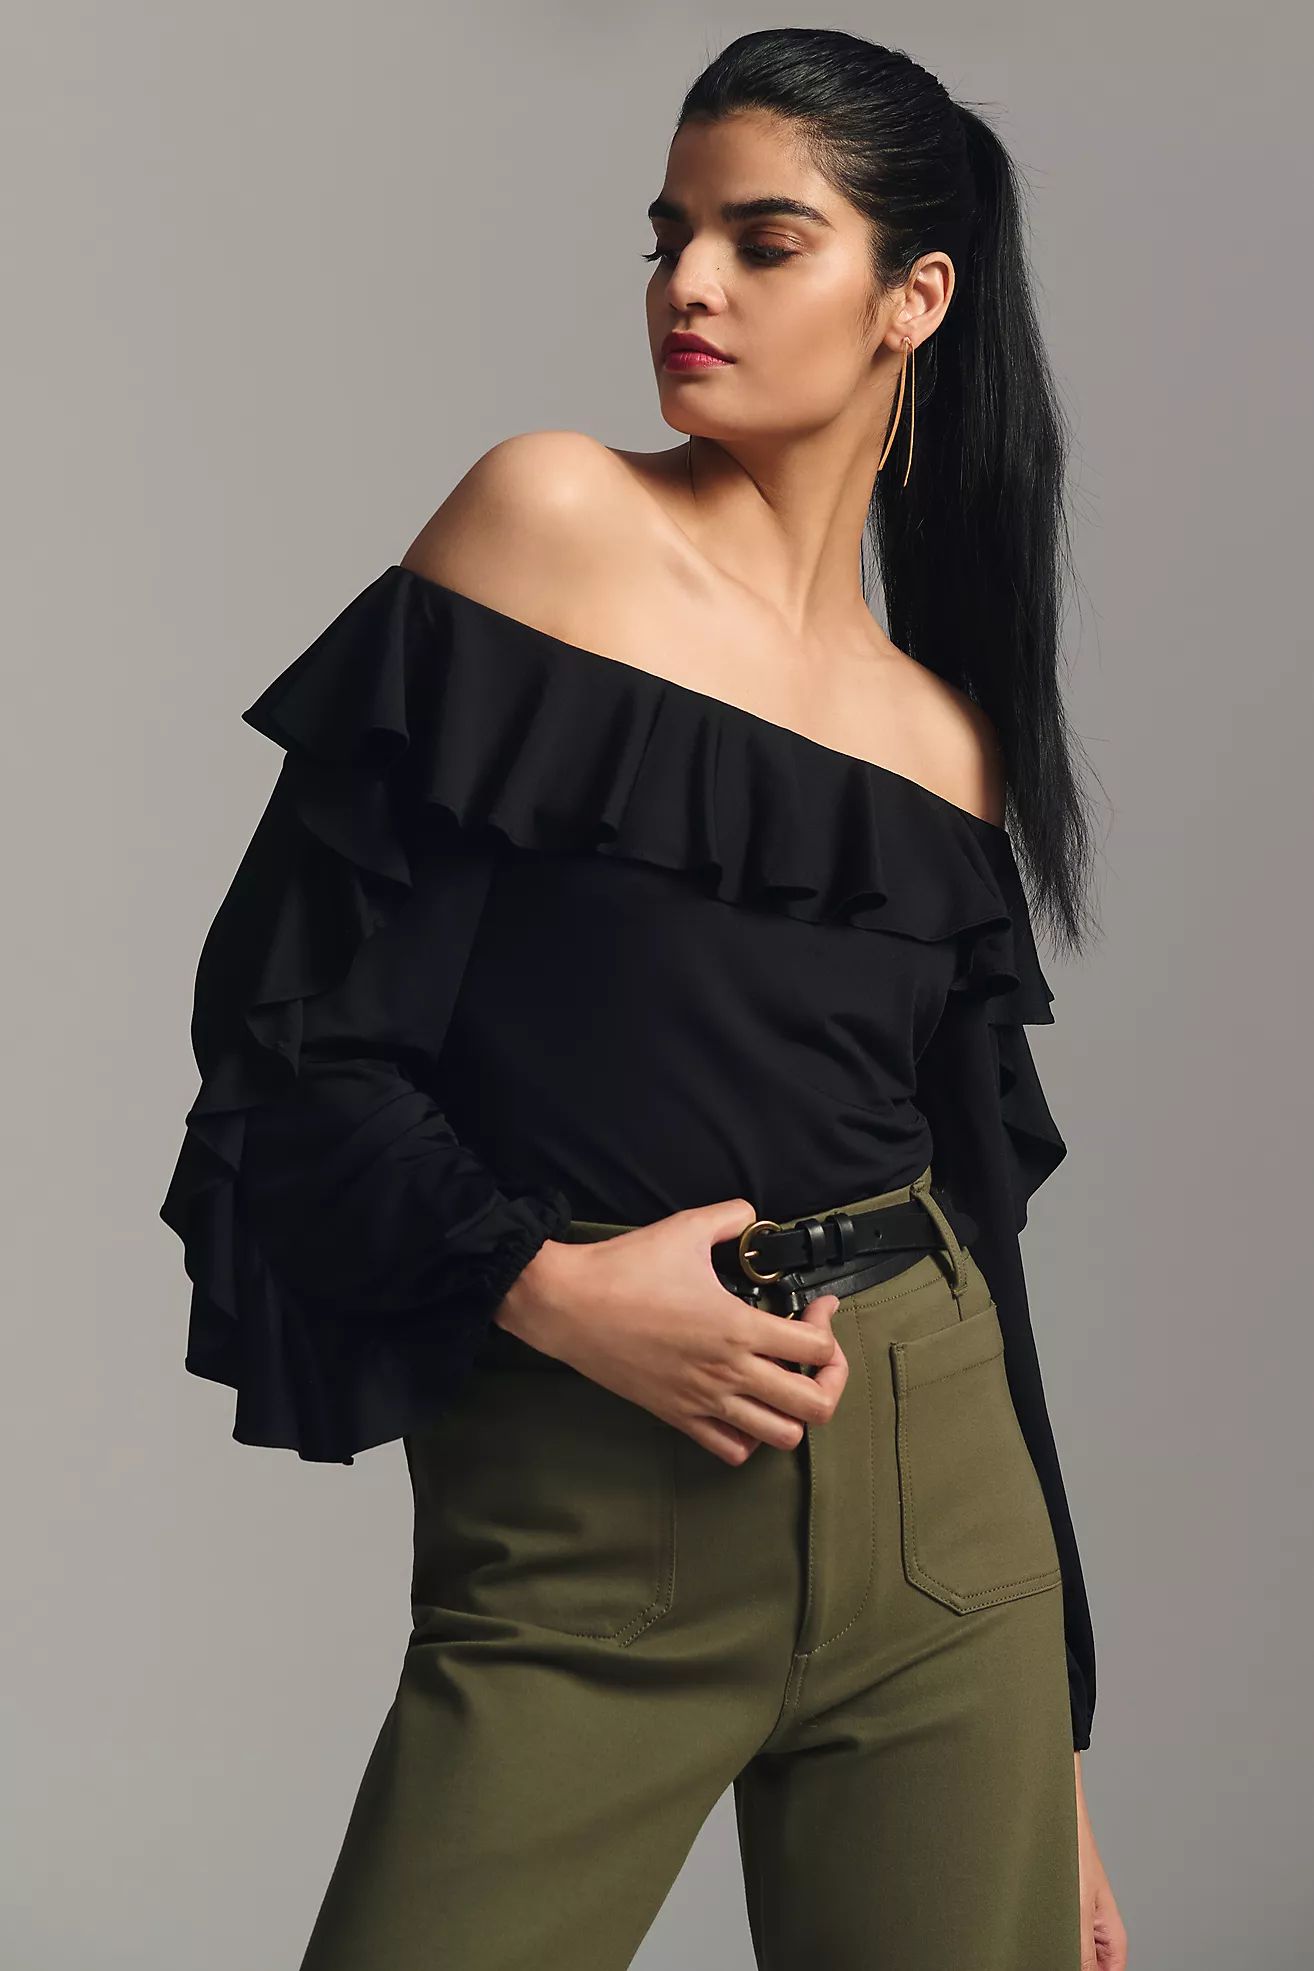 By Anthropologie Off-The-Shoulder Ruffle Top | Anthropologie (US)